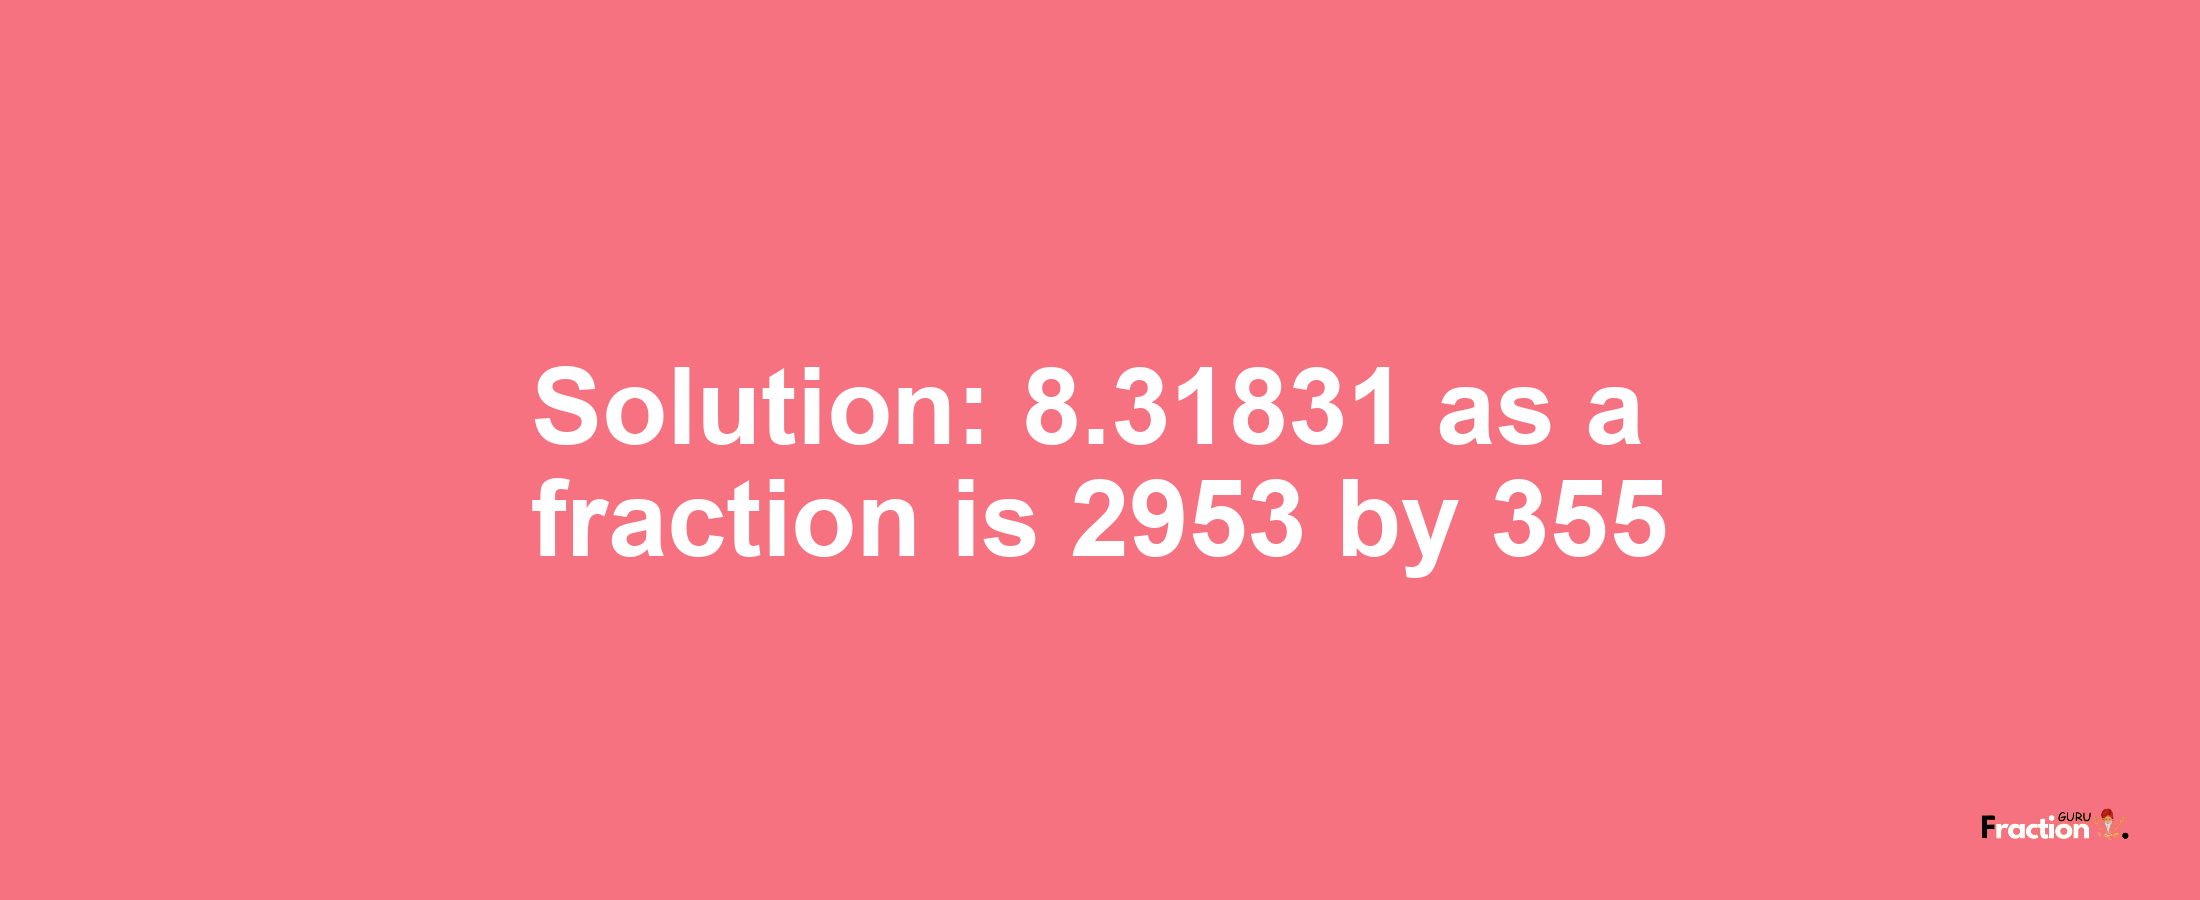 Solution:8.31831 as a fraction is 2953/355